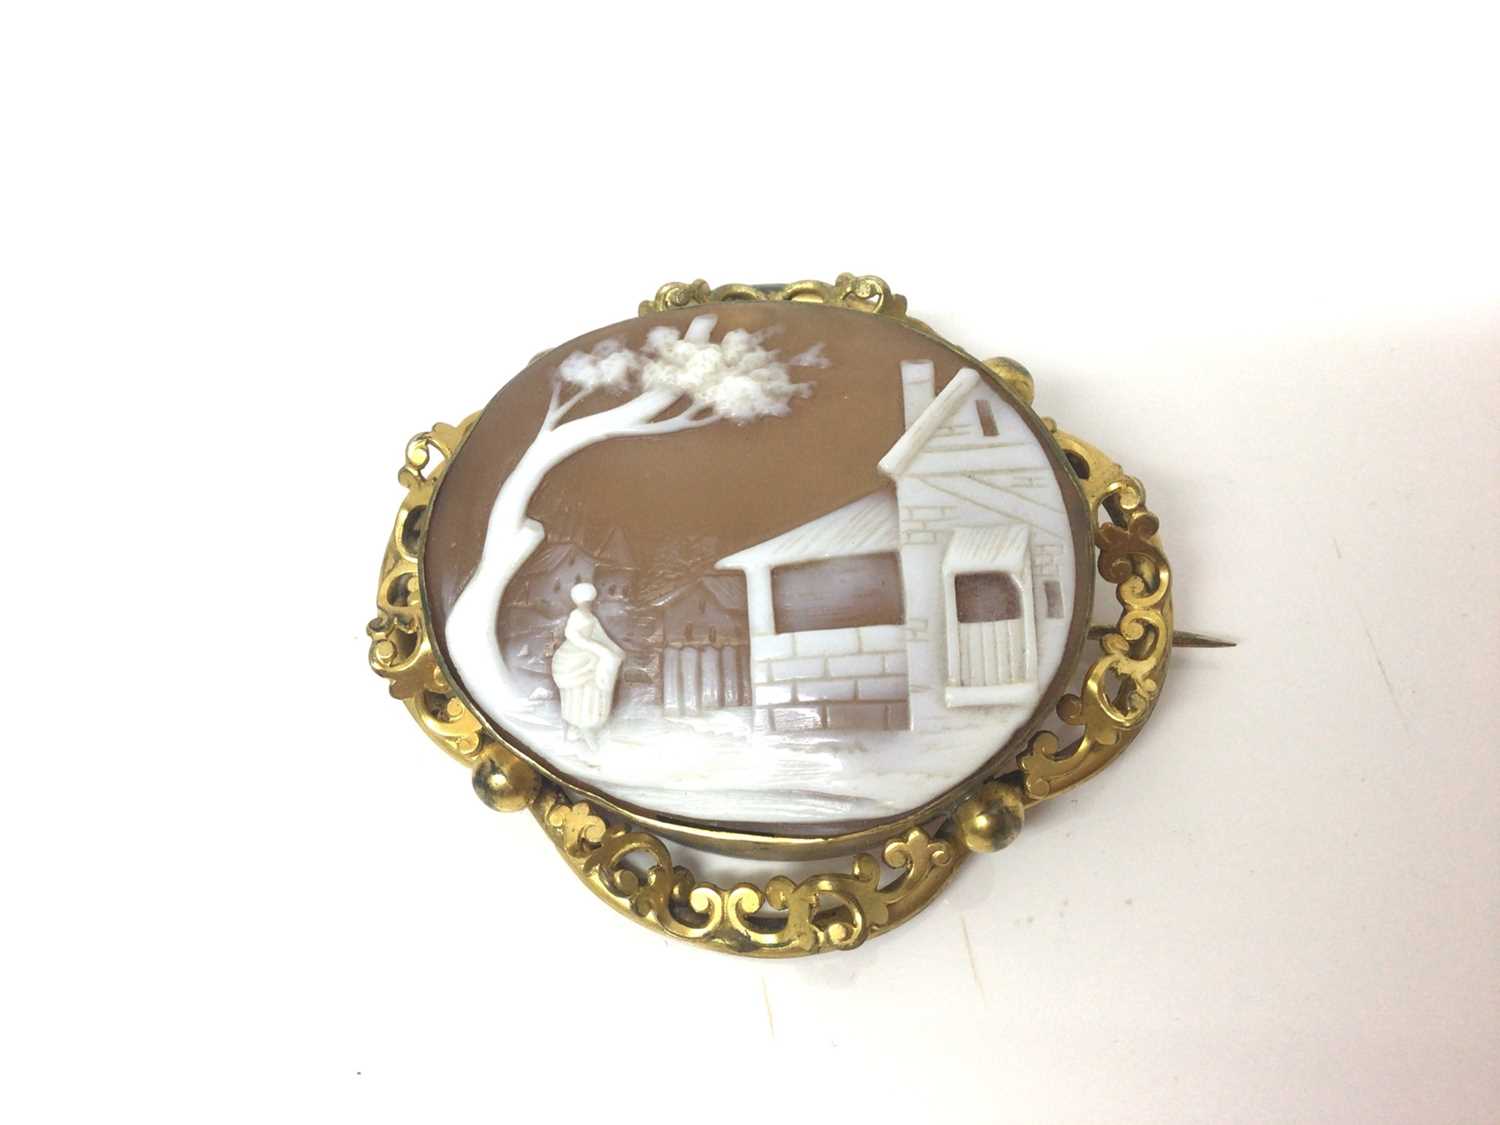 Lot 81 - Nineteenth century Italian carved shell cameo brooch in gilt metal mount, 55mm